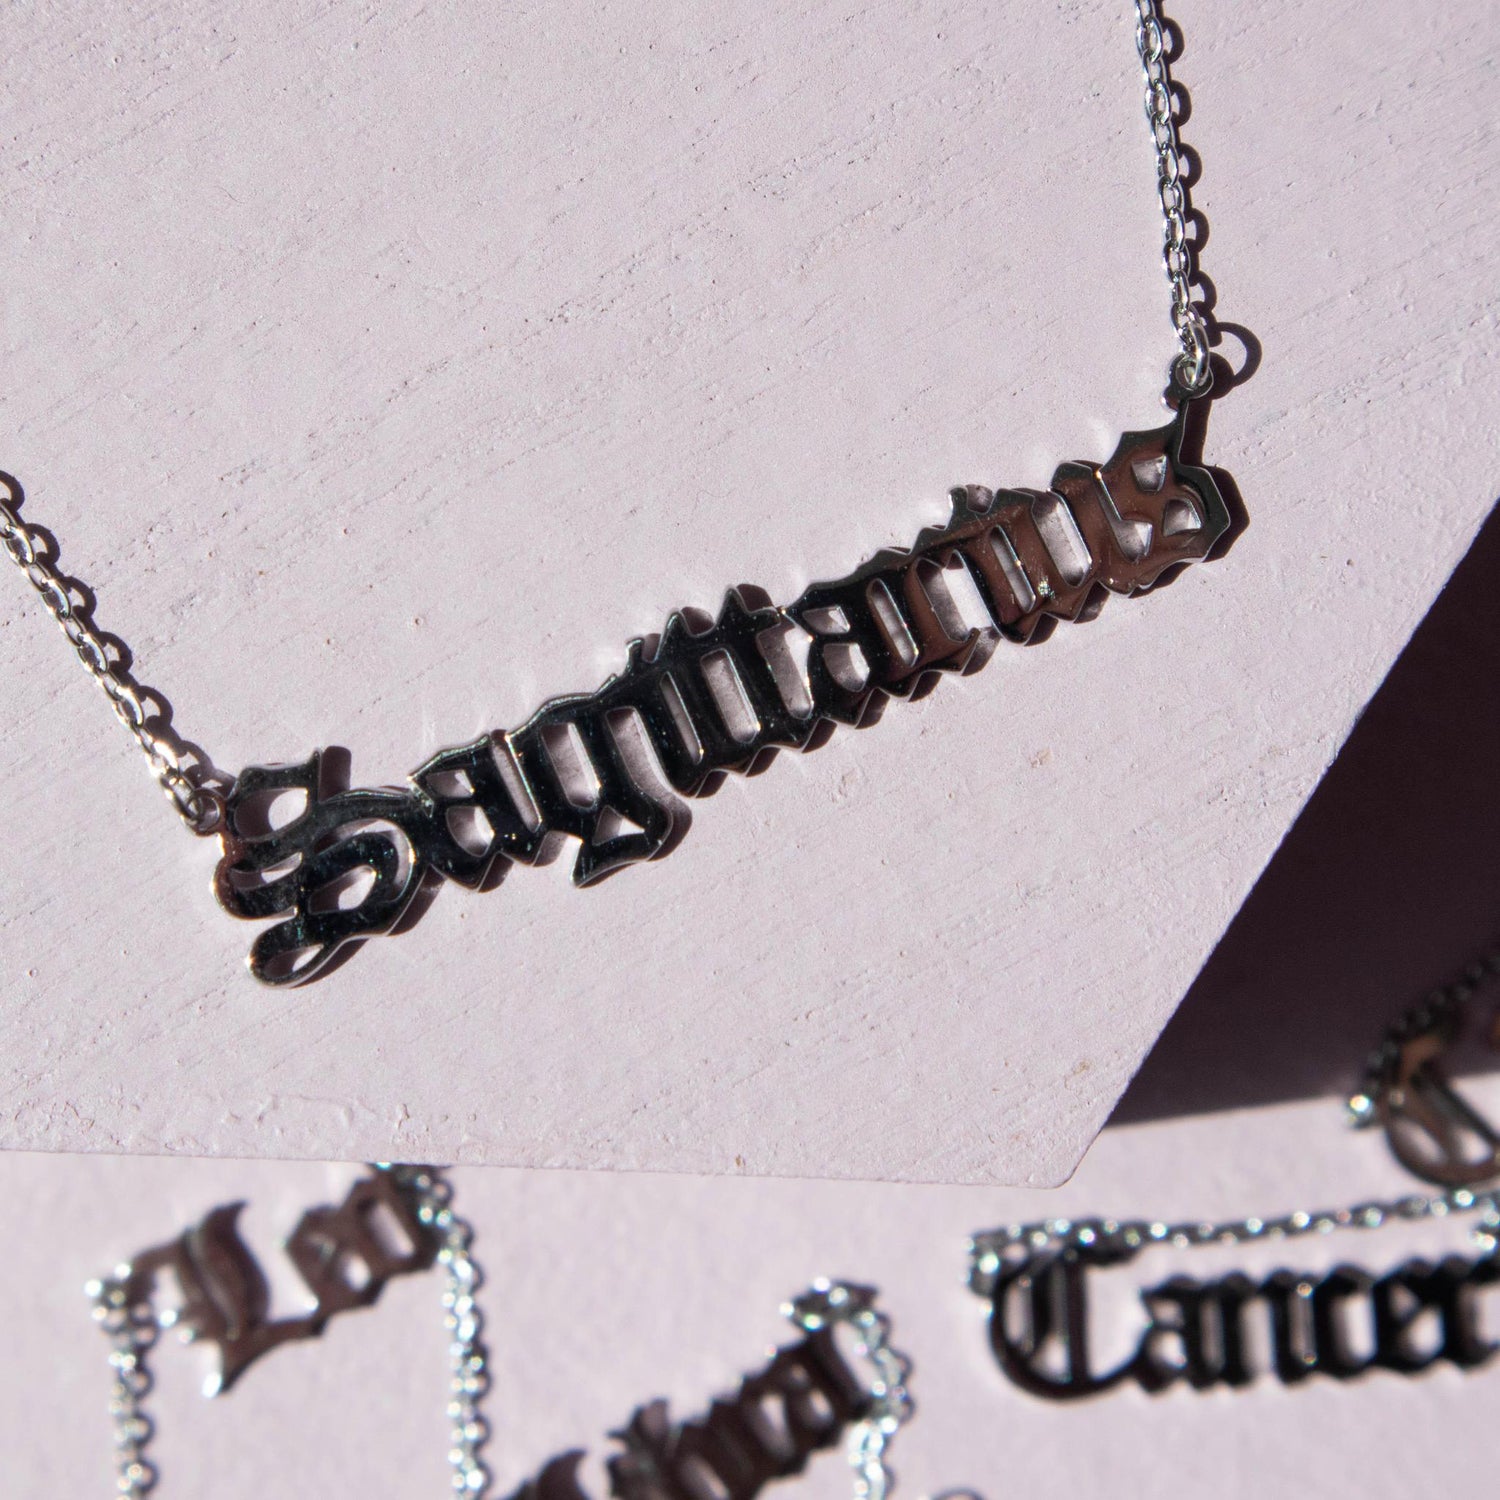 sagittarius, sagittarius chain, sagittarius necklace, sagittarius jewelry, sagittarius script necklace, sagittarius zodiac sign, zodiac sign, zodiac sign necklace